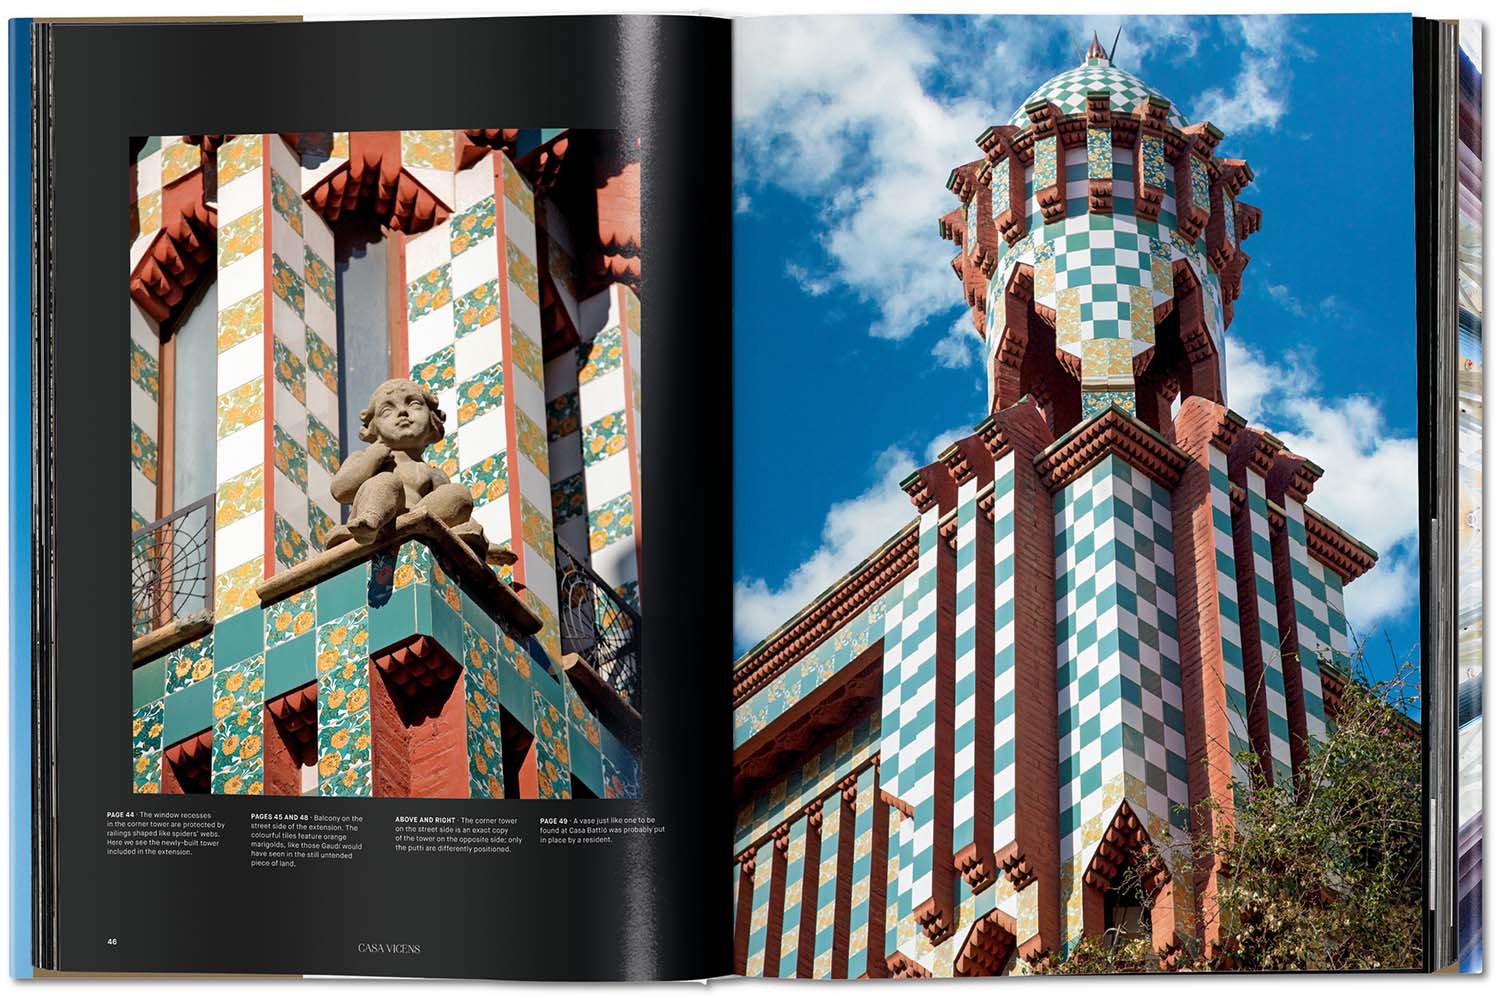 Gaudí The Complete Works, Published by TASCHEN and written by Rainer Zerbst